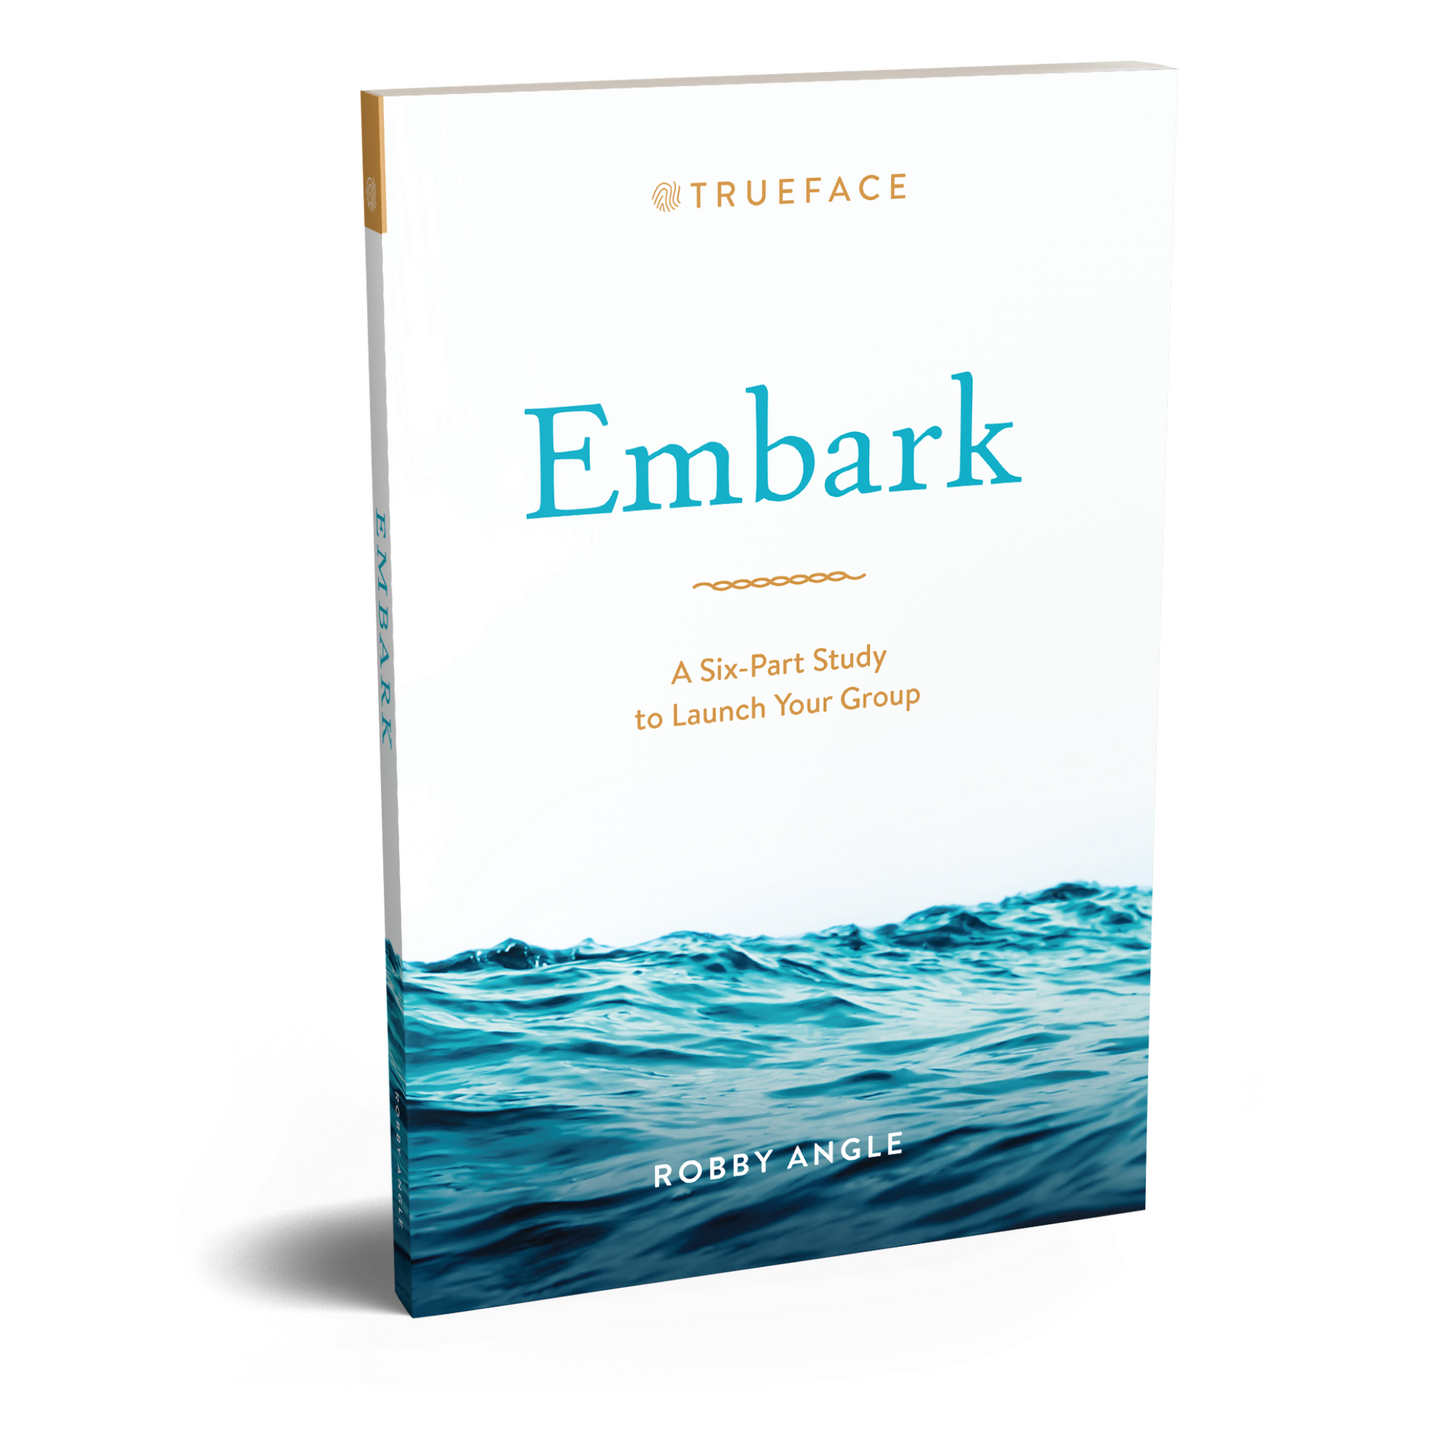 Embark: A Six-Part Study to Launch Your Group